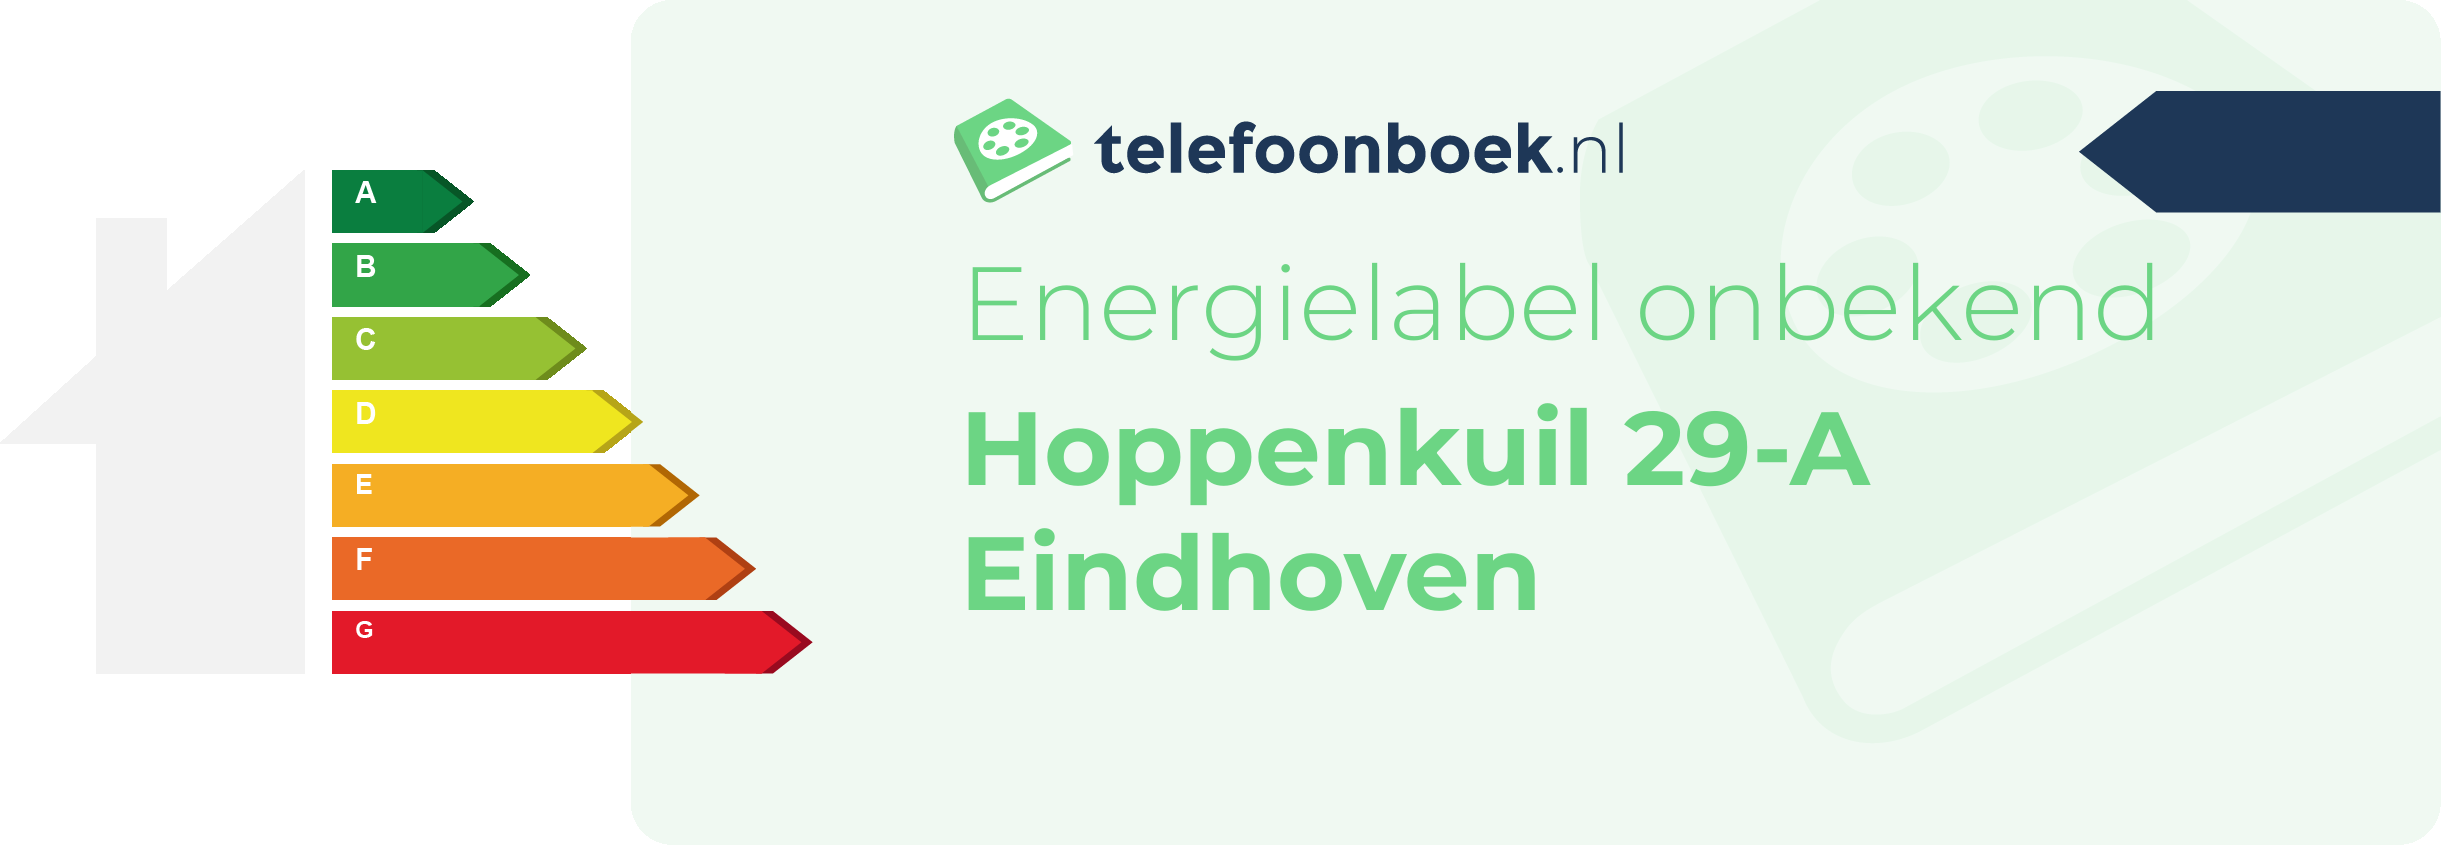 Energielabel Hoppenkuil 29-A Eindhoven